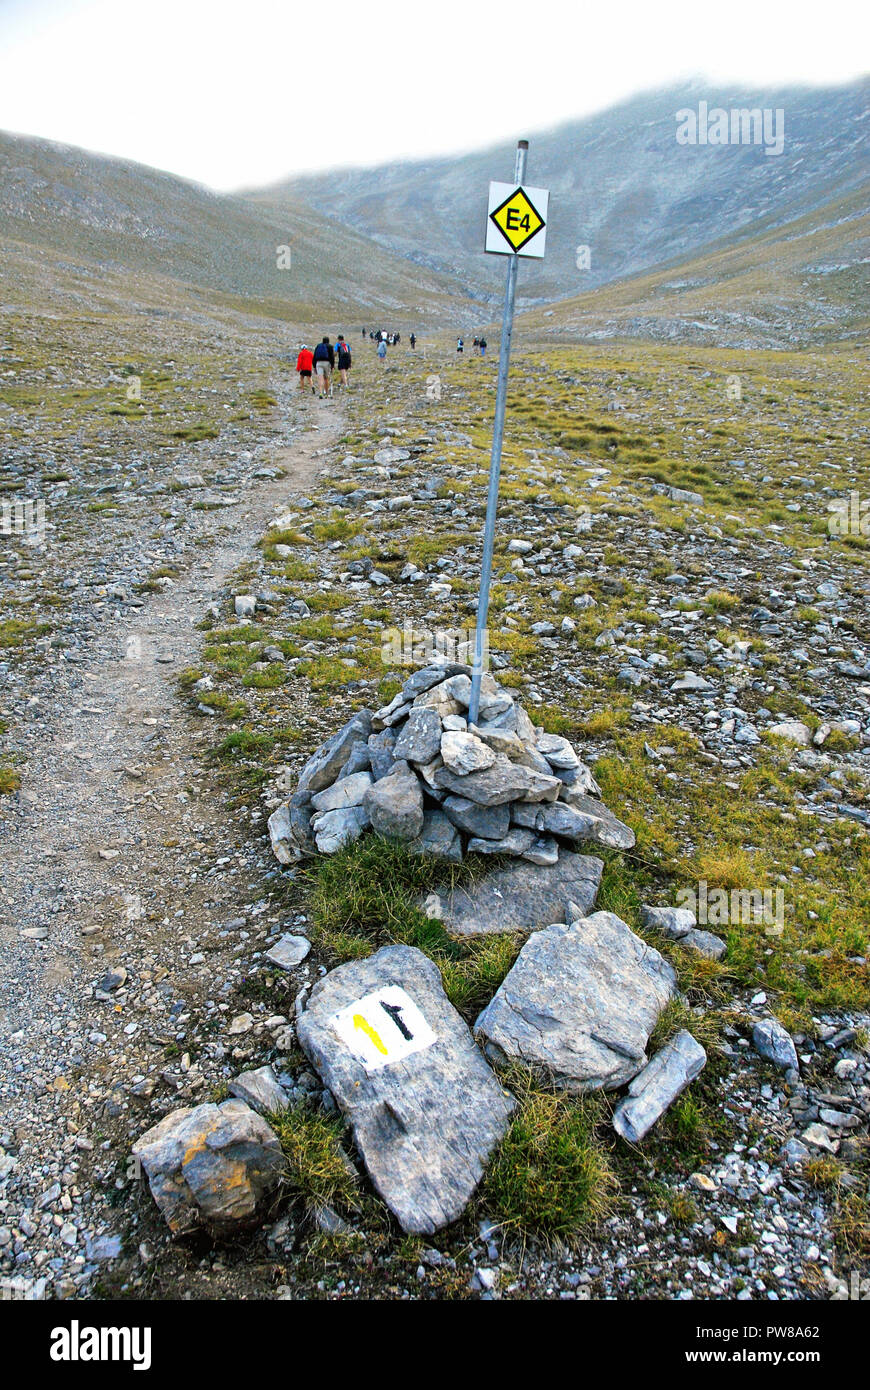 Greece, Olympus mount, a stone-made structure on Olympus mt, at 2.500 m. height, showing to the climbers the way of the E4 European long distance path Stock Photo